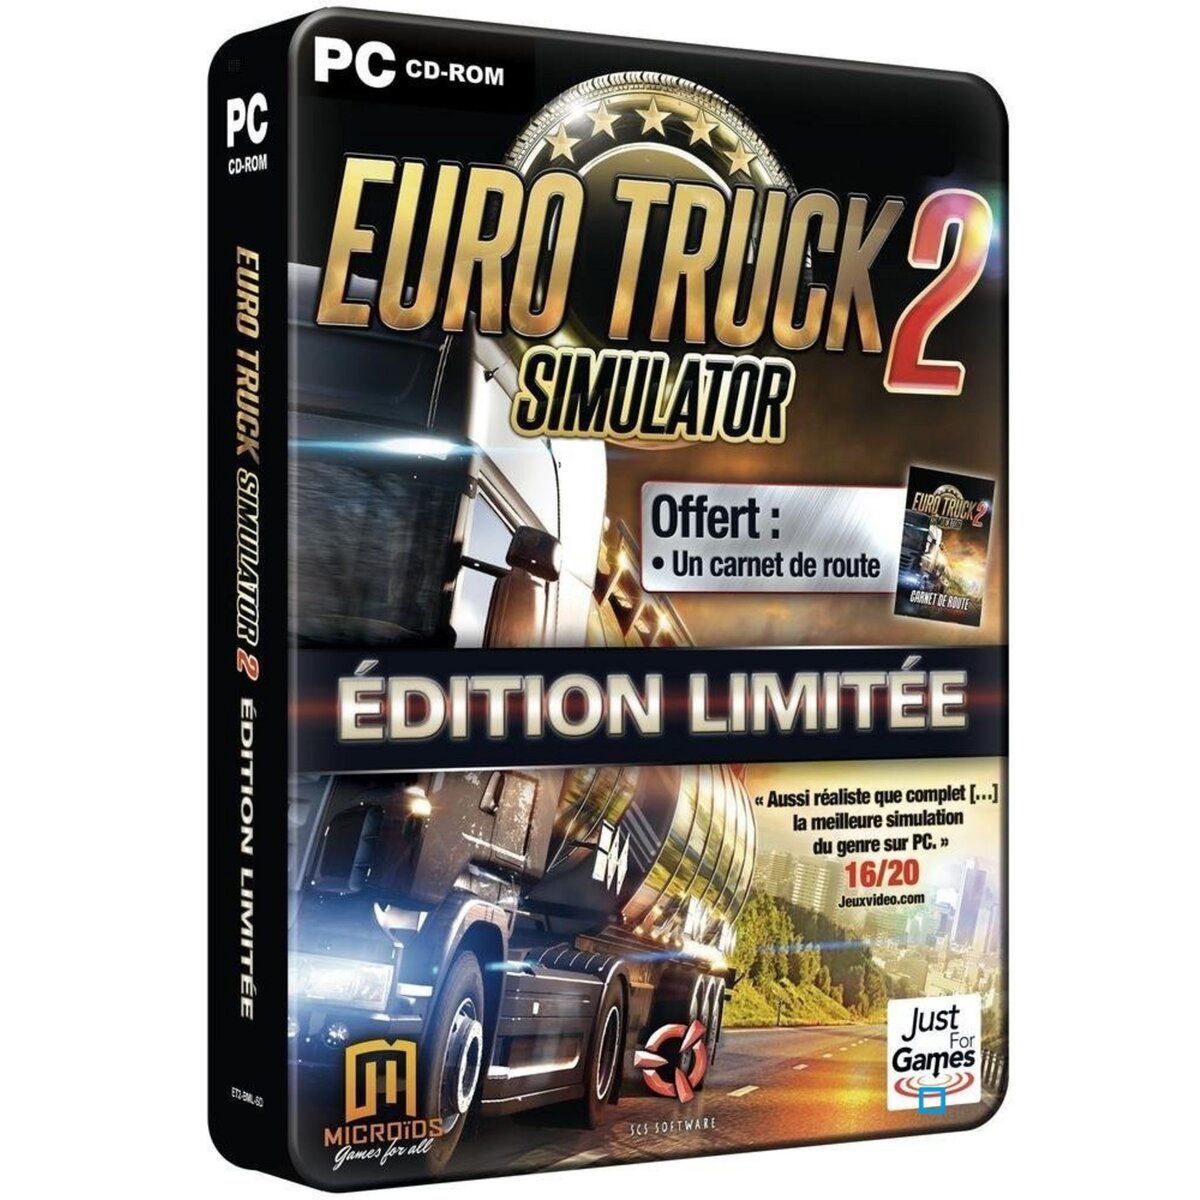 Eurotruck 2 Simulator - Complete Limited Edition PC